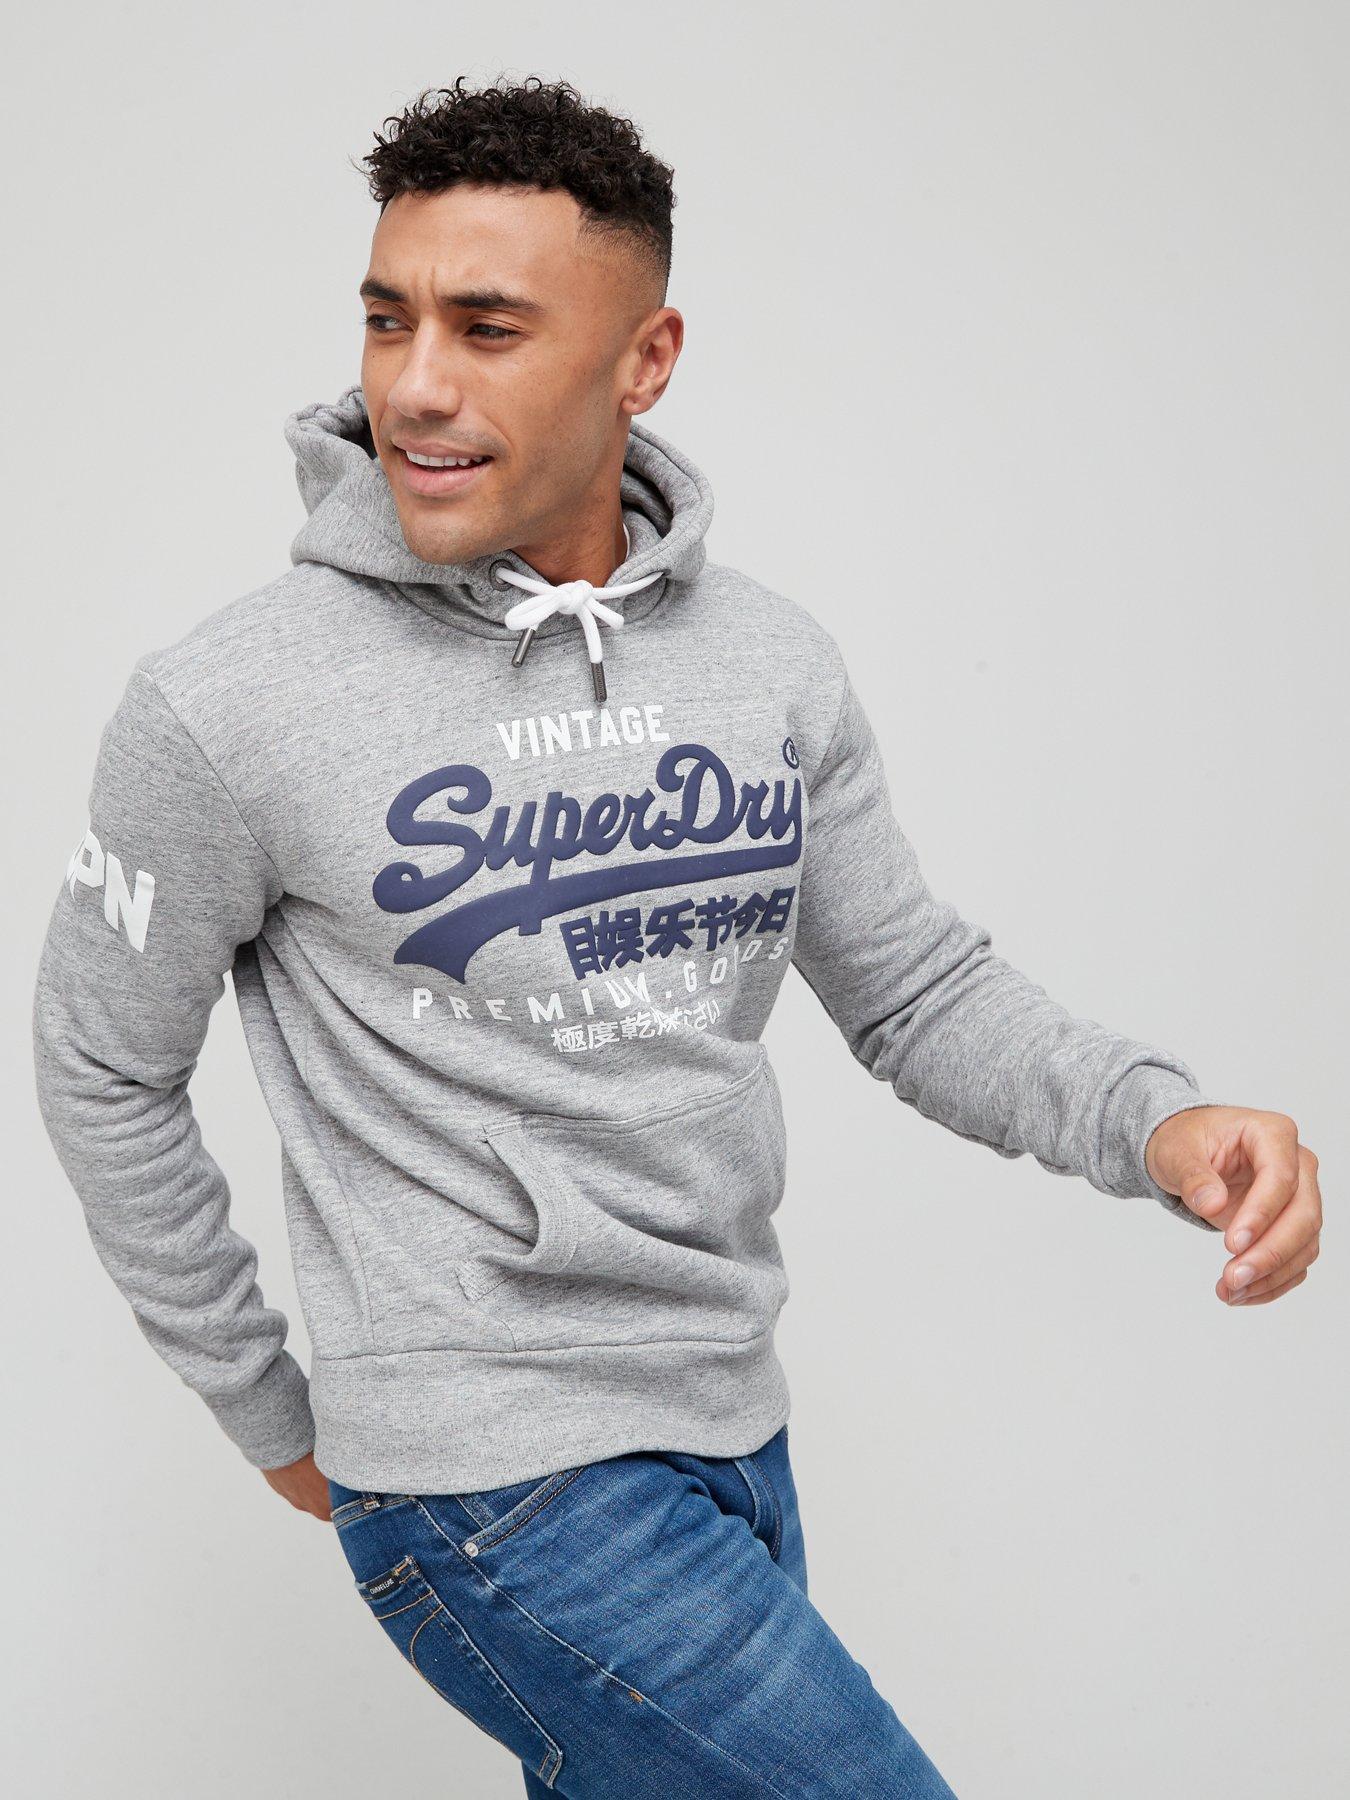 Superdry, Hoodies, Jackets & Watches